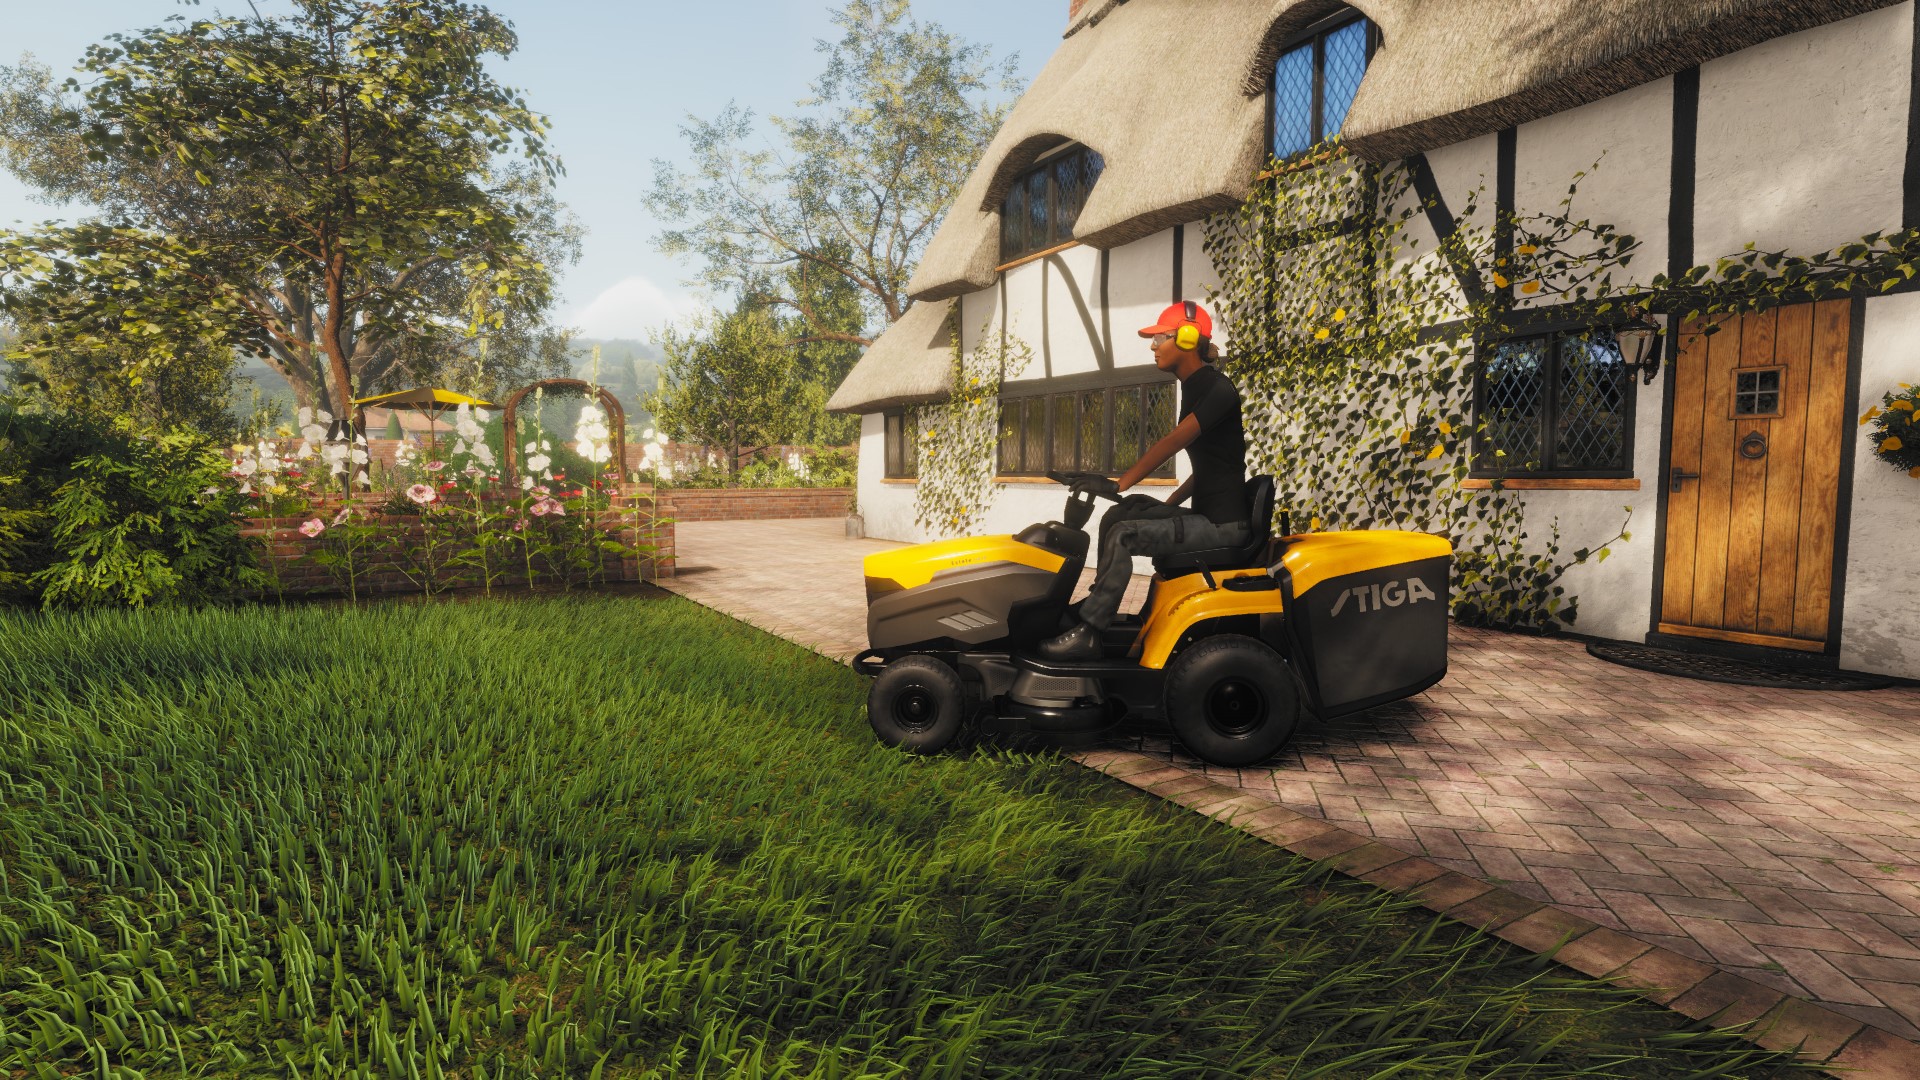 Next week's free PC game from epic is about mowing the lawn